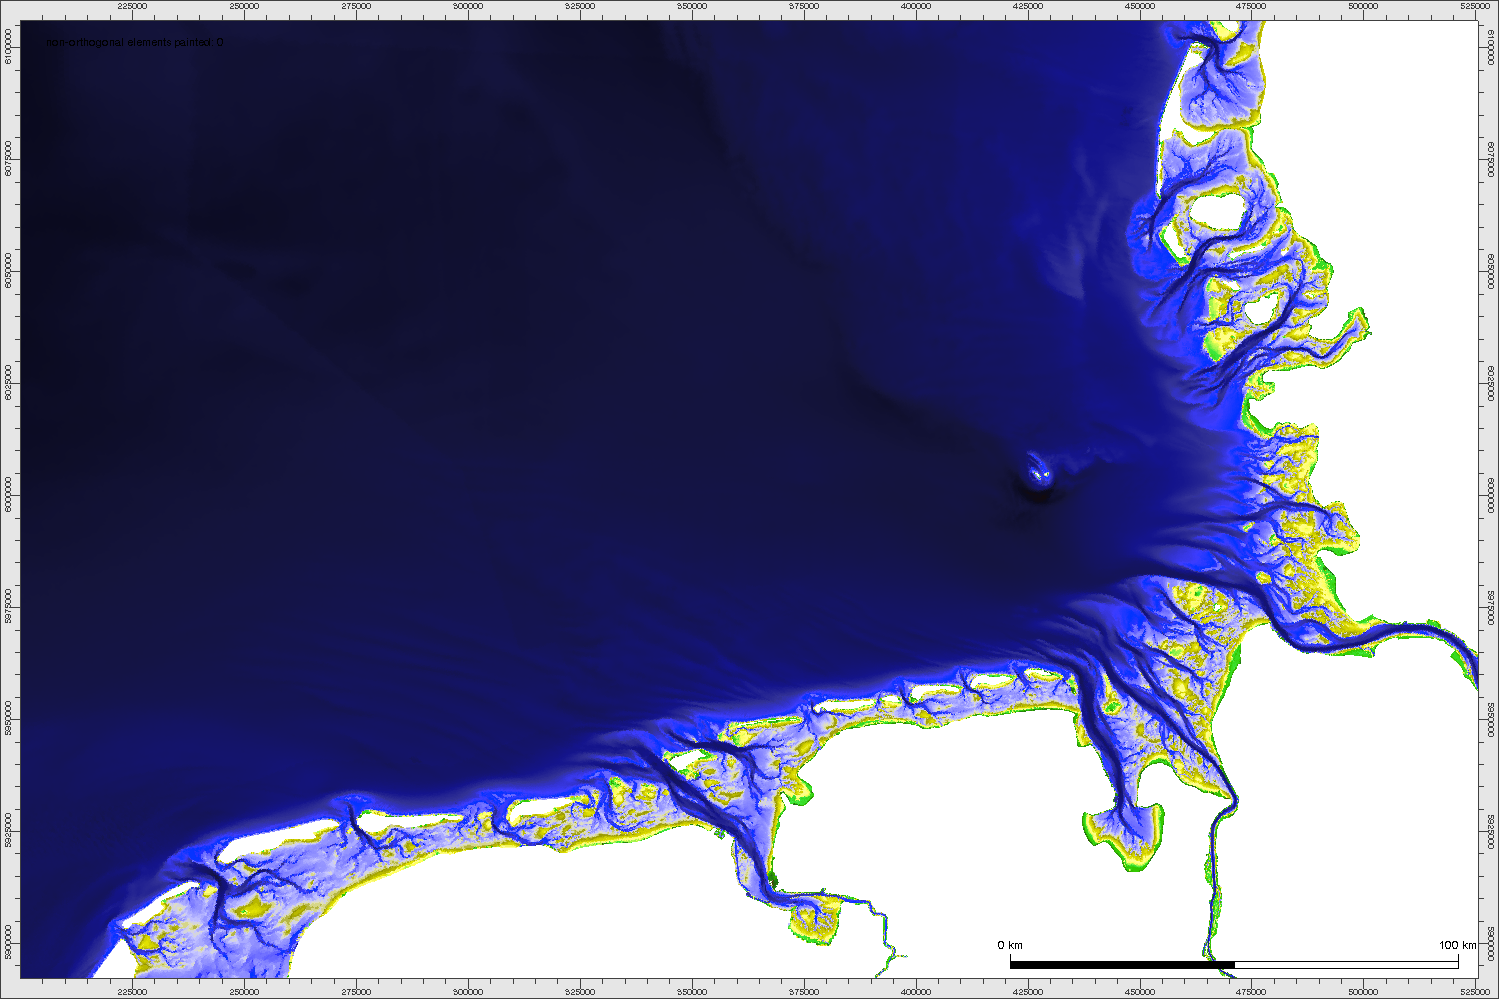 Bathymetry 2006 the southern North Sea in 2D